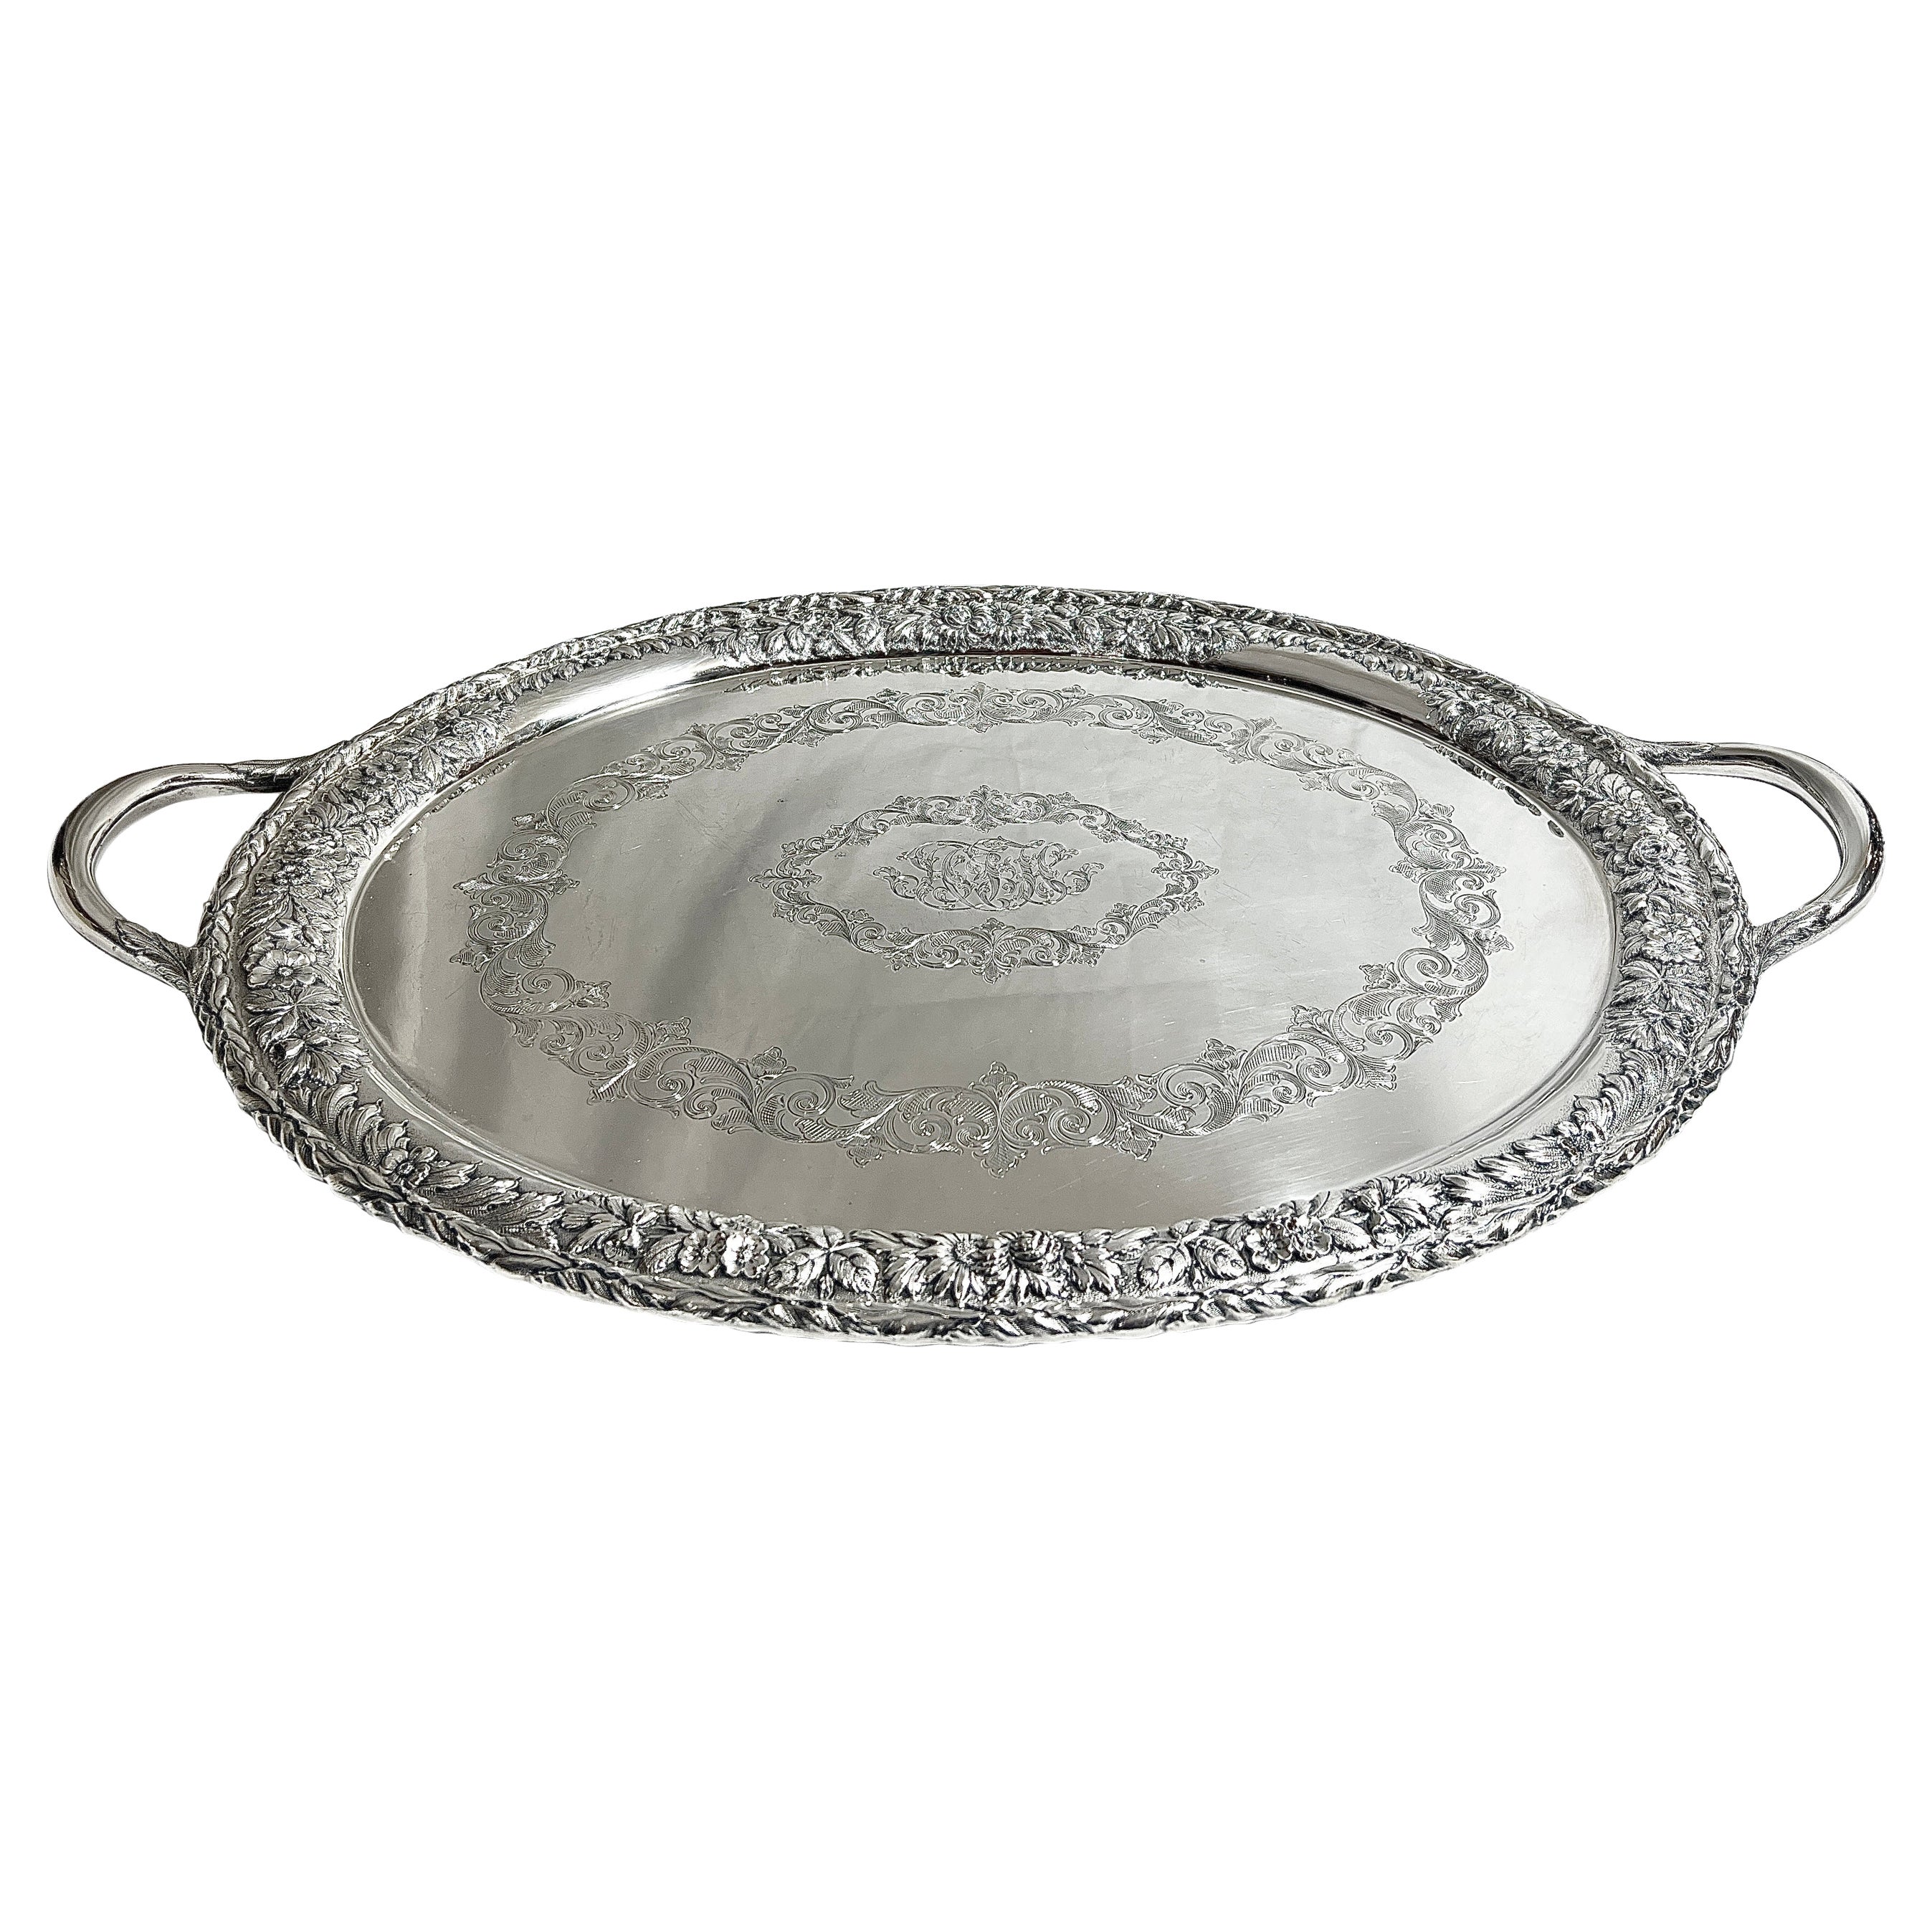 Antique Mid 19th Century American Sterling Silver Tray Made By "S. Kirk & Son." For Sale